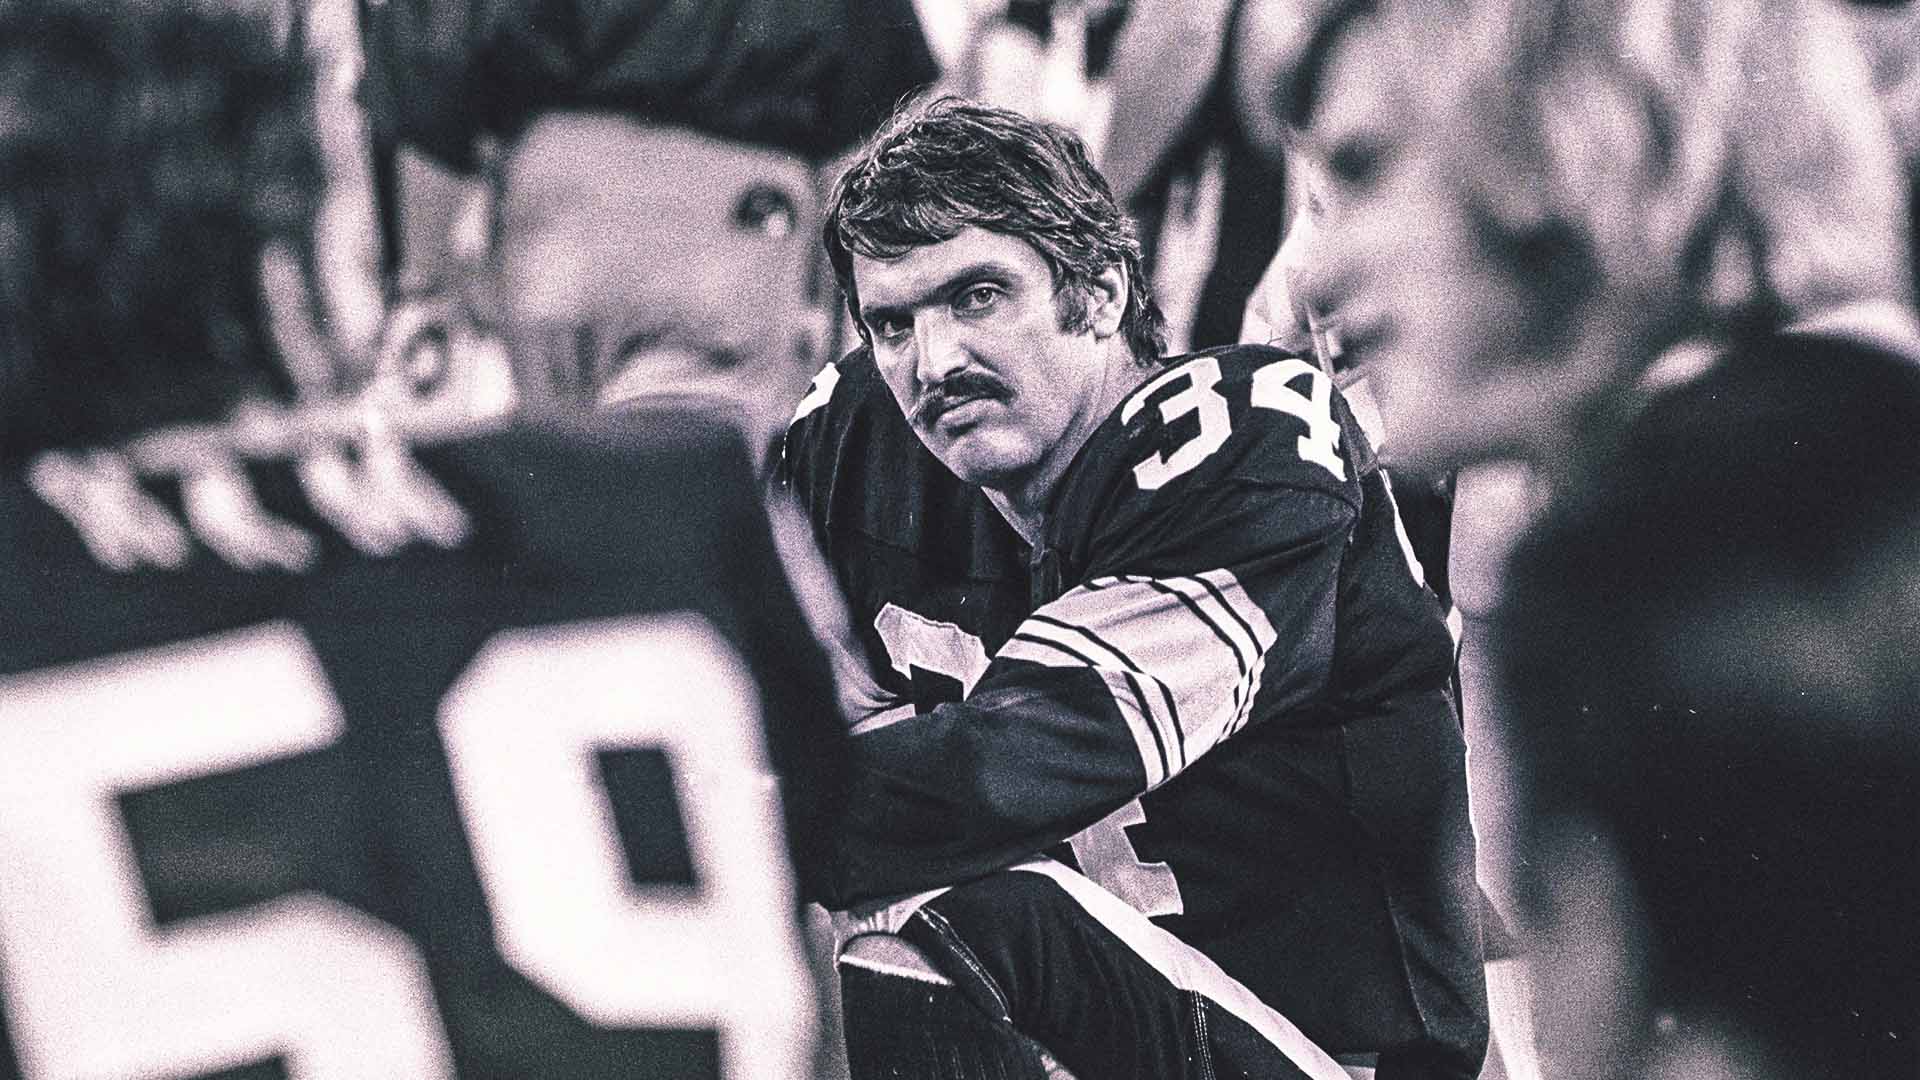 Andy Russell, a star LB who helped turn the Steelers into champs, dies at 82